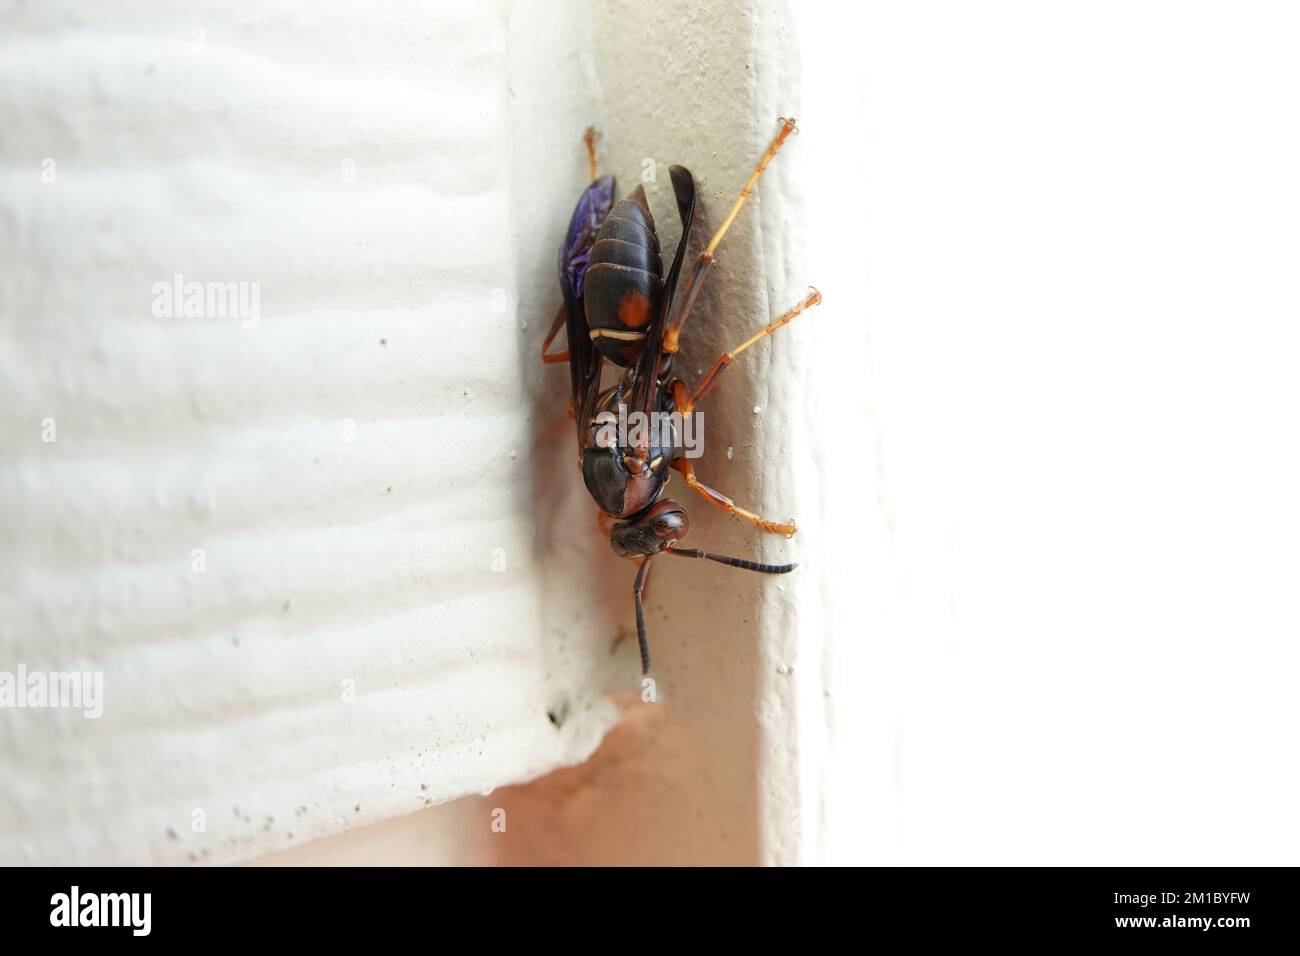 Polistes fuscatus (common name dark or northern paper wasp) in Indiana, USA Stock Photo